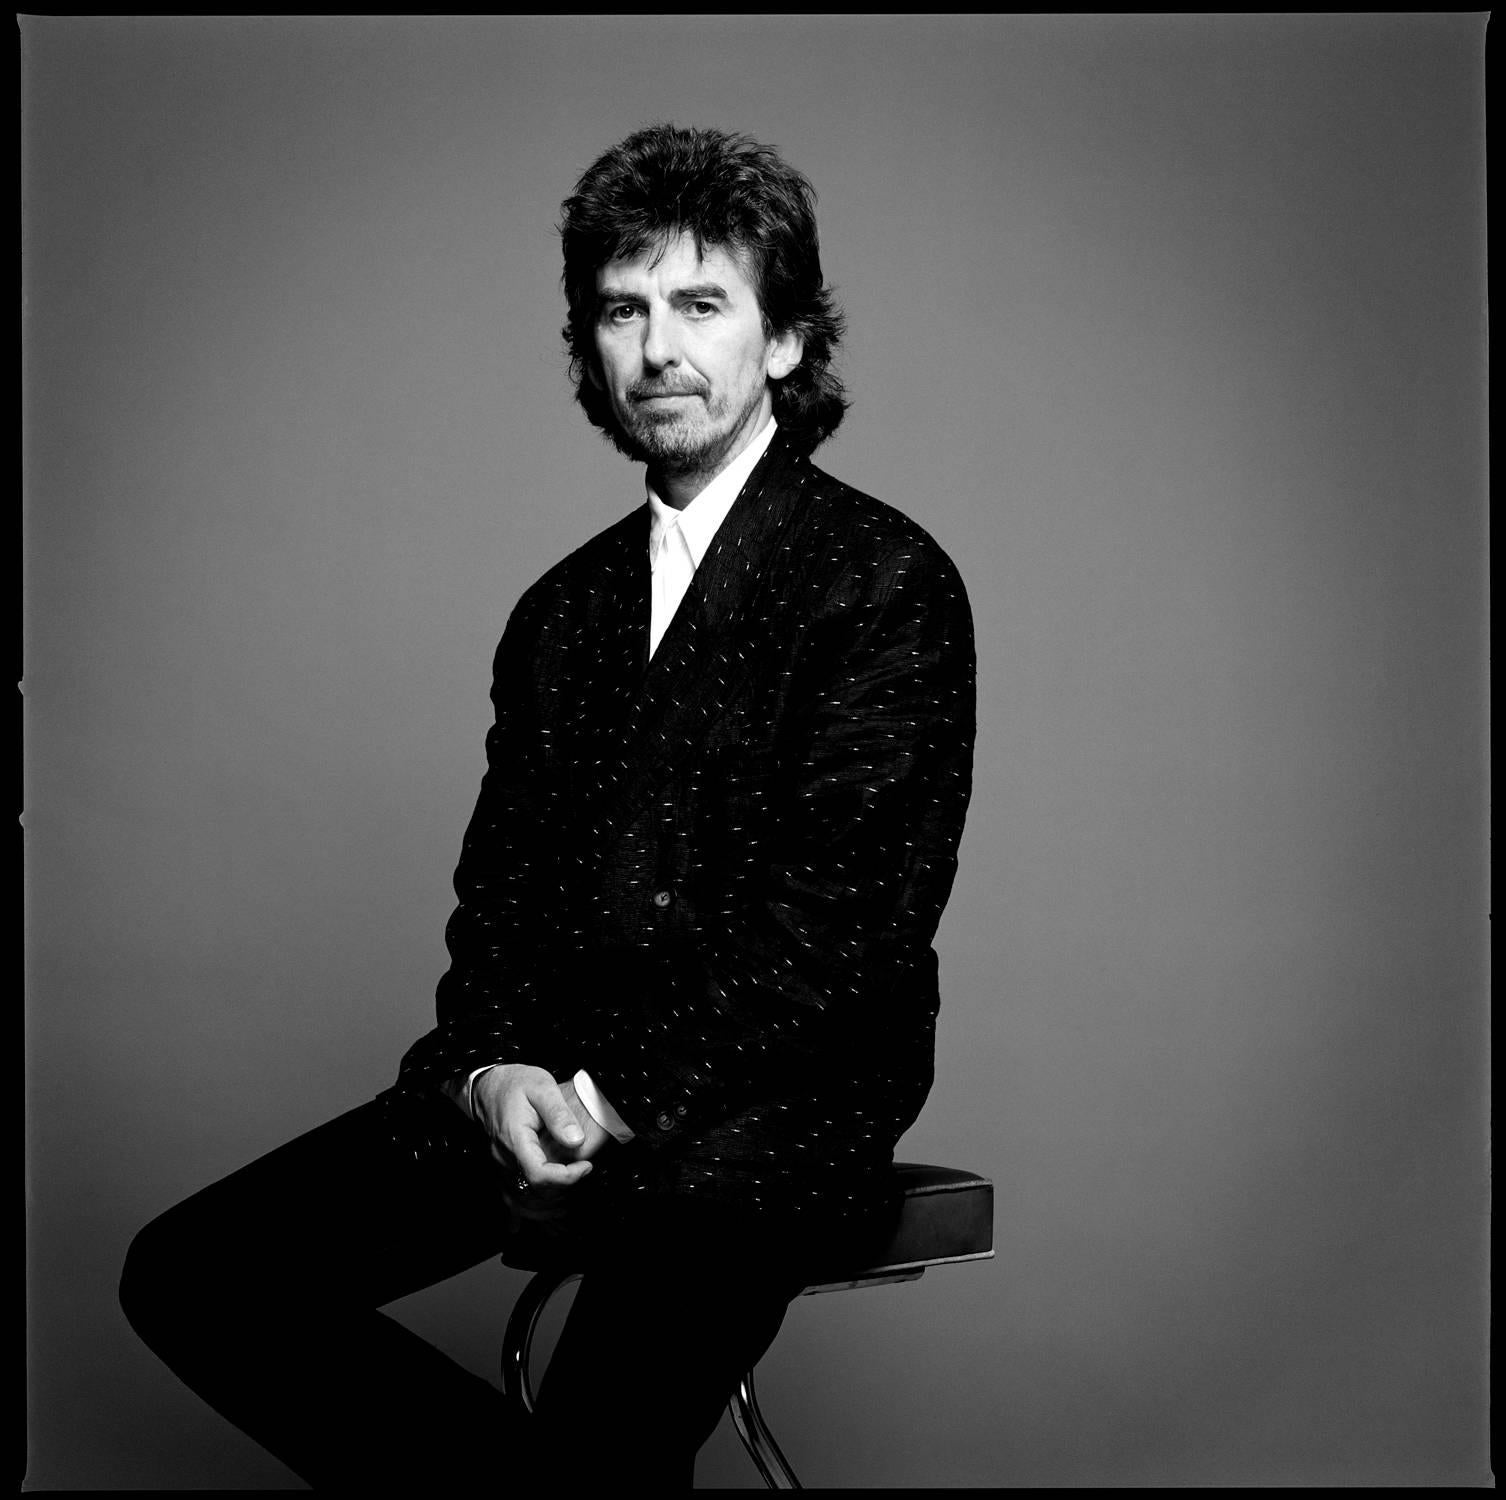 George Harrison of The Beatles shot in 1987 by Chris Cuffaro.

24 x 26 inches

Chris Cuffaro’s photography career spans over 35 years. He began by shooting local rock shows in Northern California. After moving to Los Angeles in the early 1980s, he